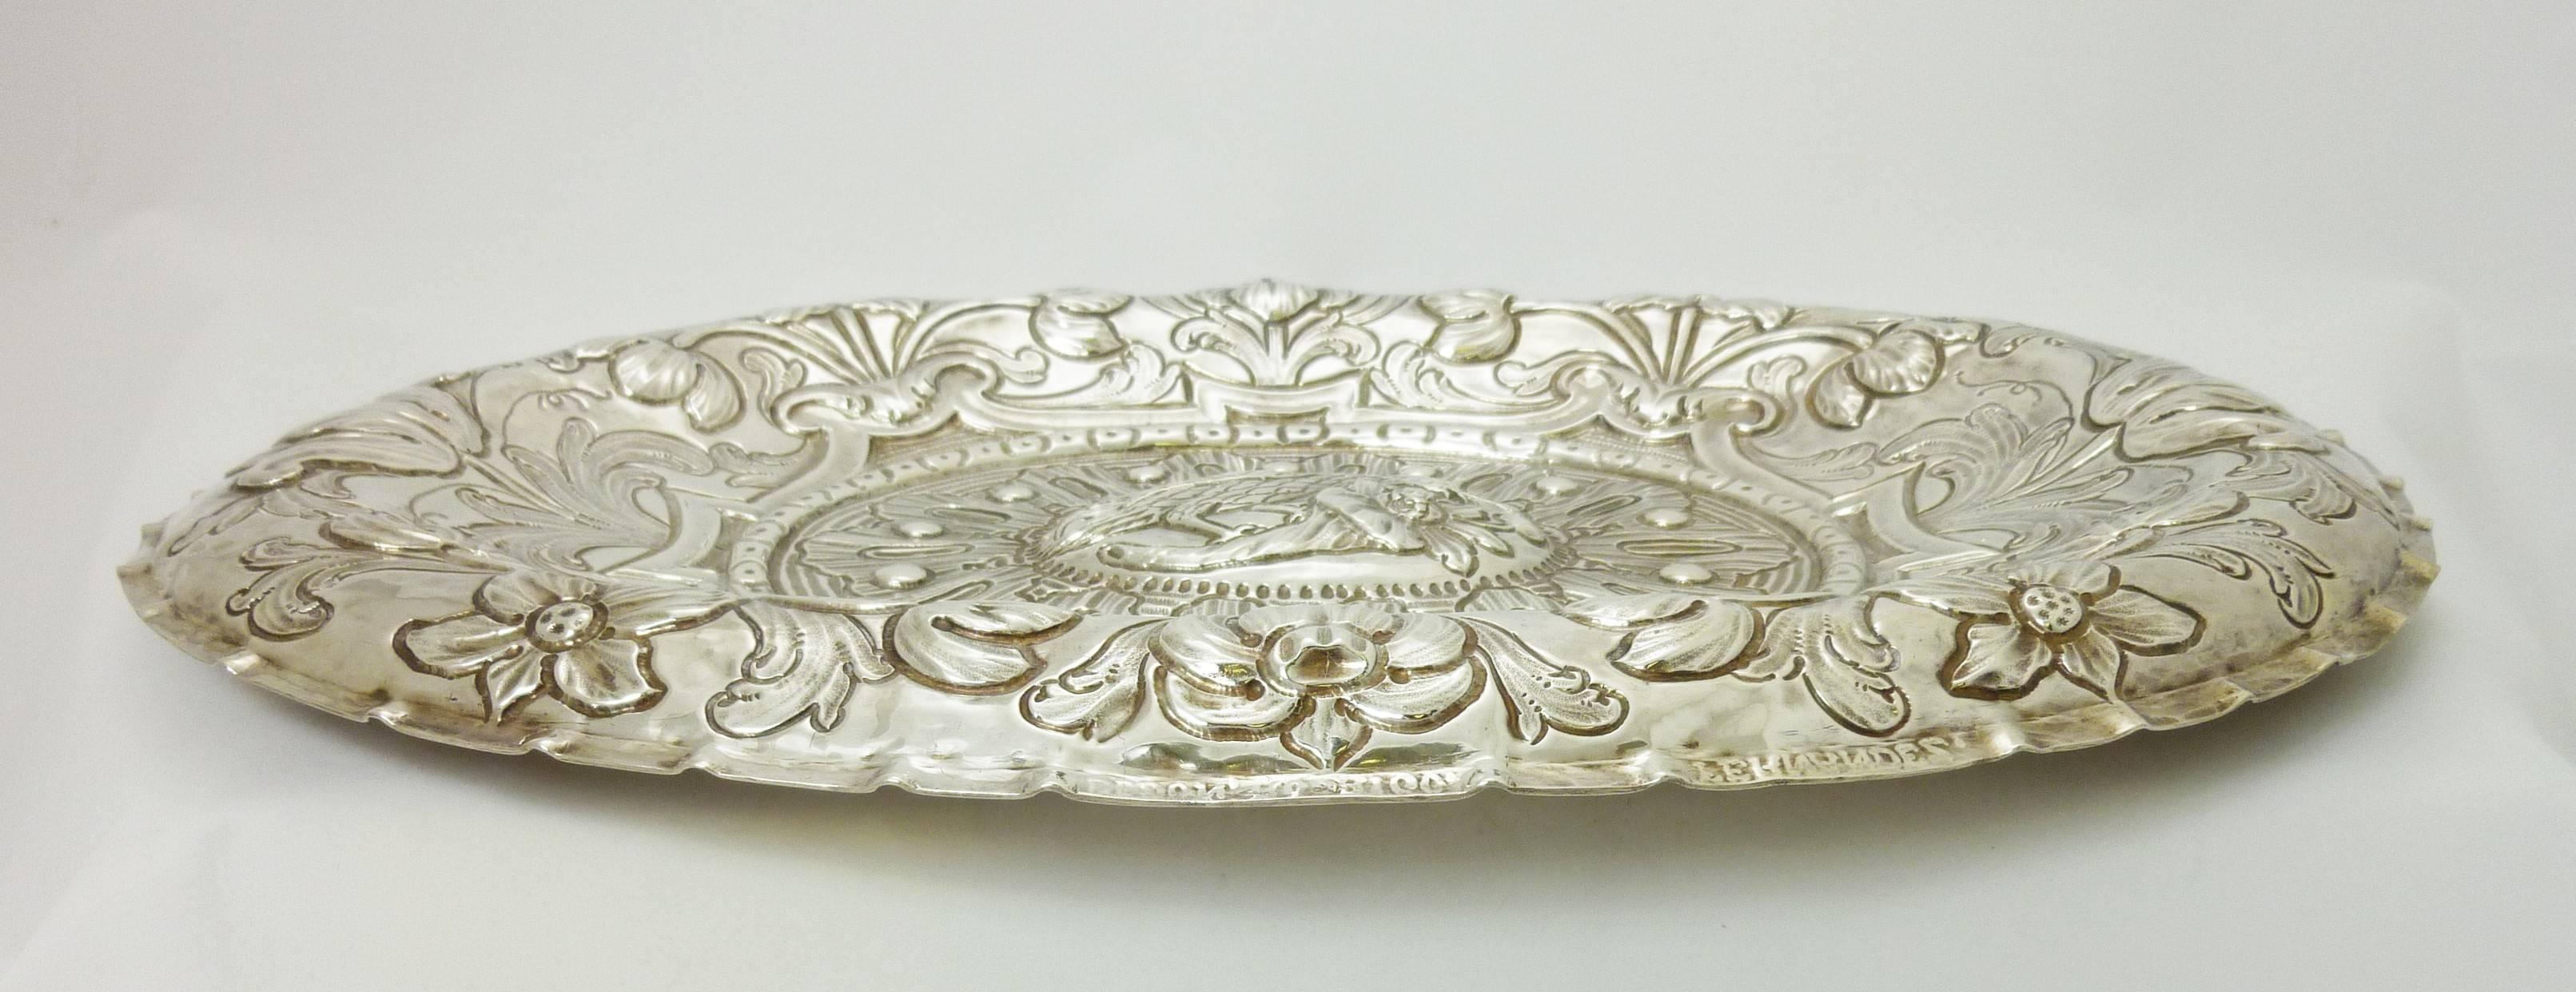 Being offered is a Spanish, or Spanish Colonial silver dish. Impressive object made during the first half of the 18th century, with all-over hand embossed motifs. Dimensions: 19 inches x 14 inches. Marked as illustrated. In excellent condition.